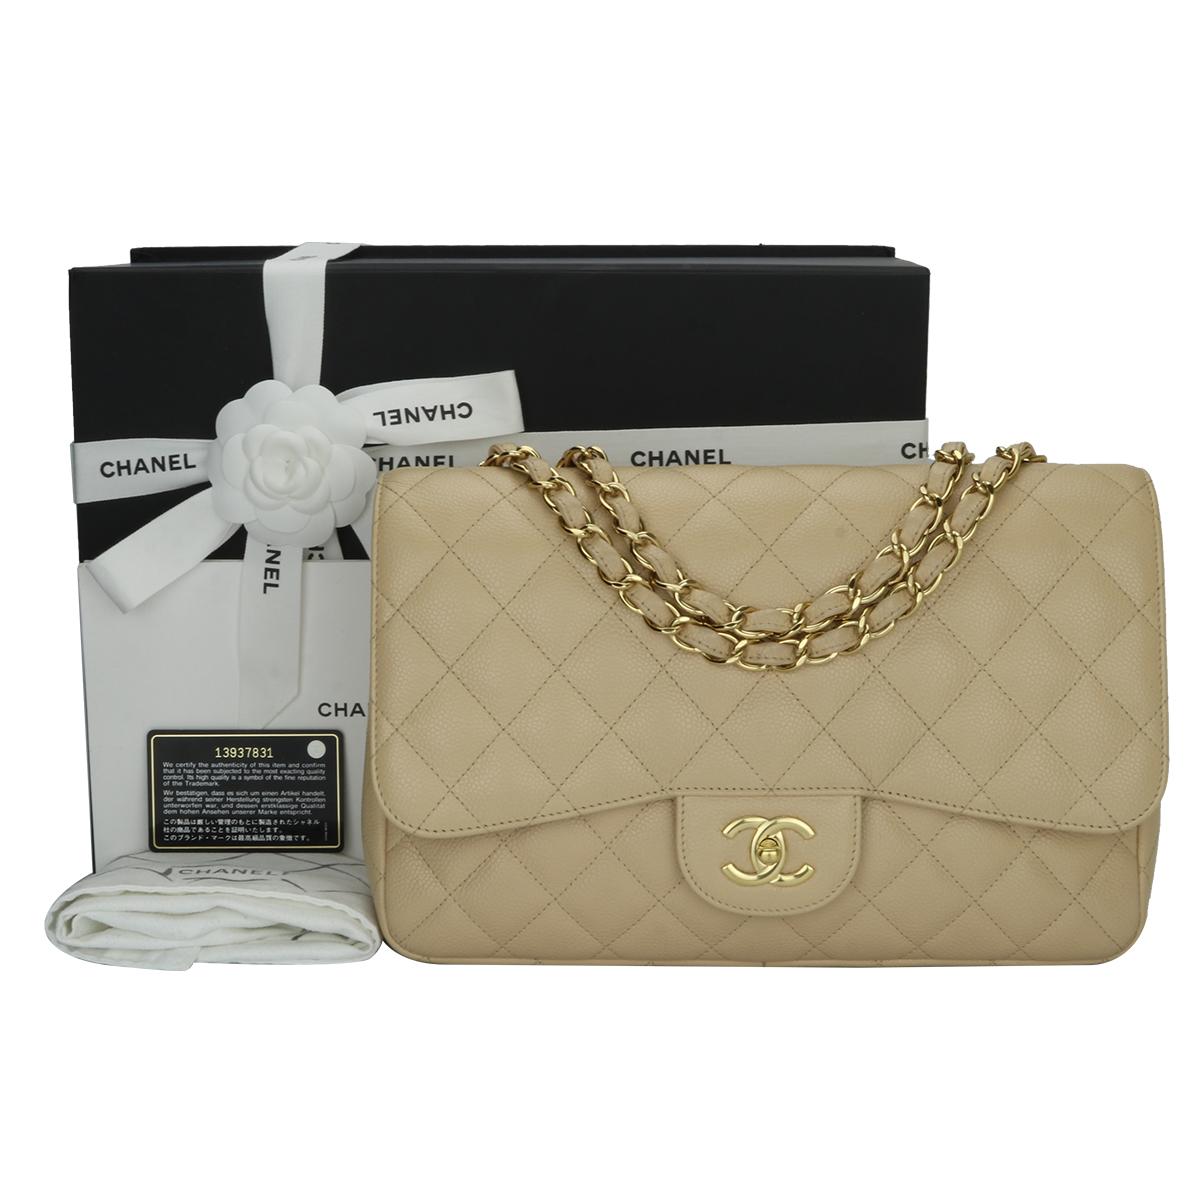 Authentic CHANEL Classic Single Flap Jumbo Beige Clair Caviar with Gold Hardware 2009.

This stunning bag is in excellent condition, the bag still holds the original shape and the hardware is still very shiny.

Exterior Condition: Mint condition,